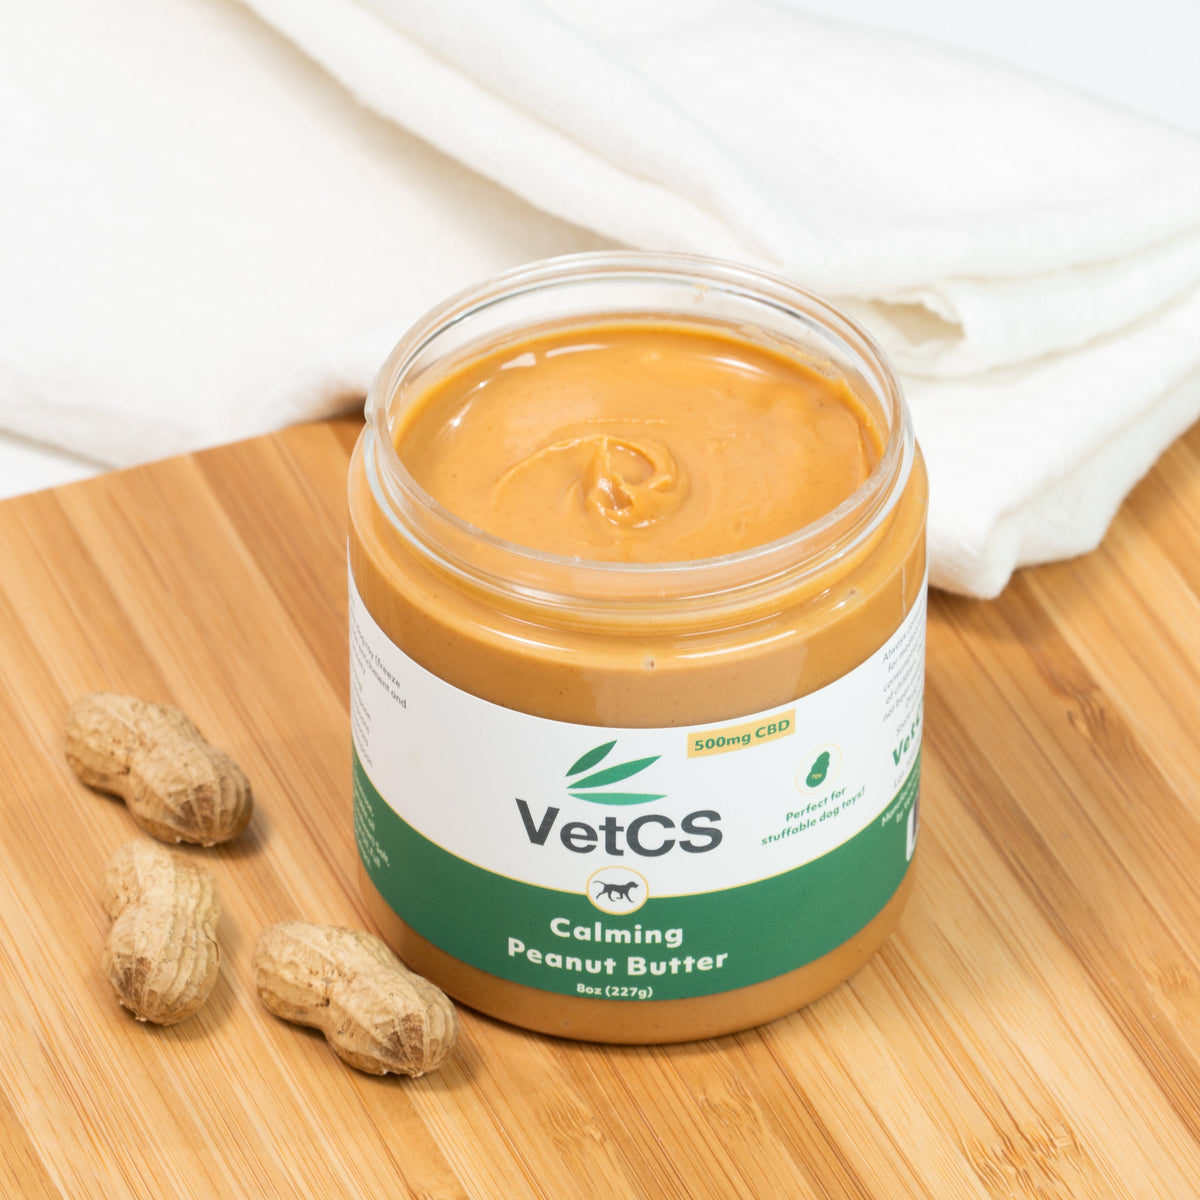 Calming CBD peanut butter for dogs, easy to add to stuffable dog toys!